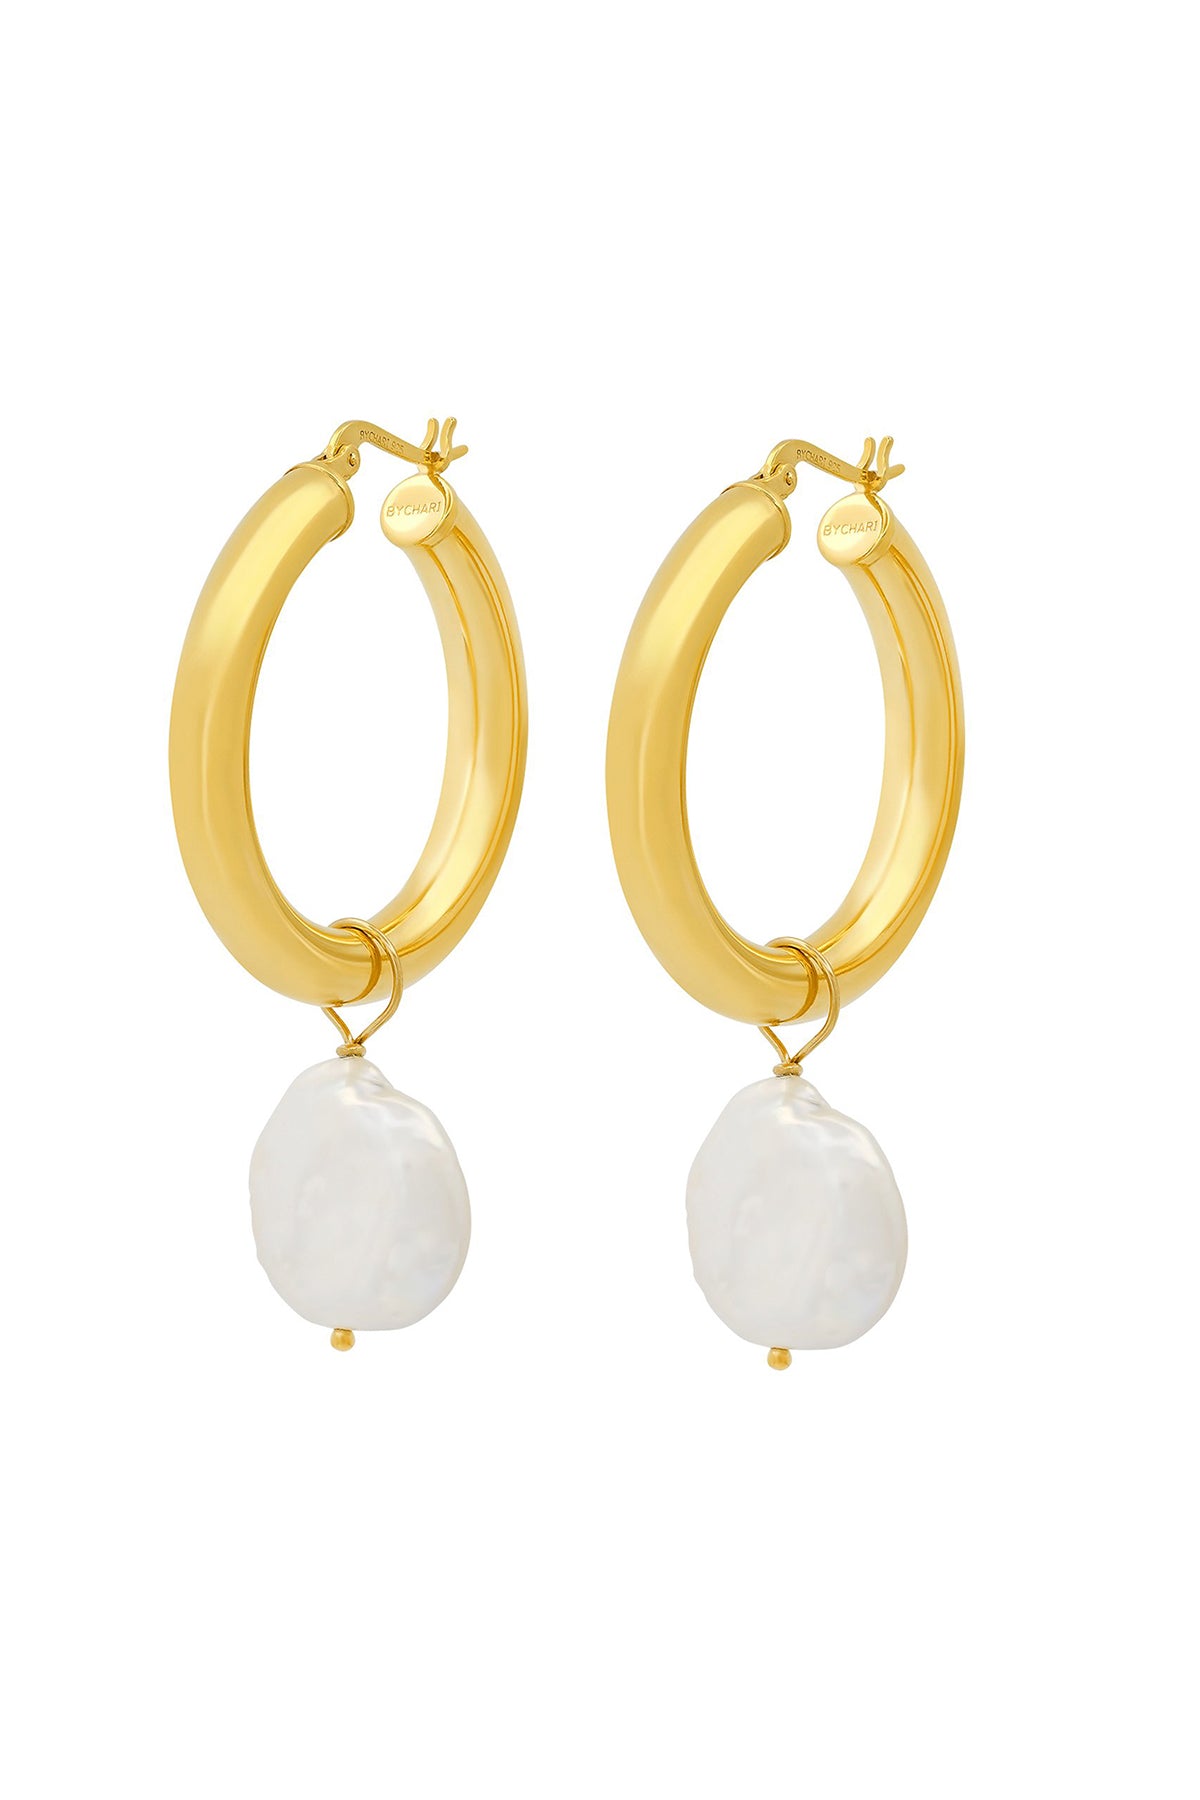 Sade Hoops with Pearl Charm by Bychari-22386207948993